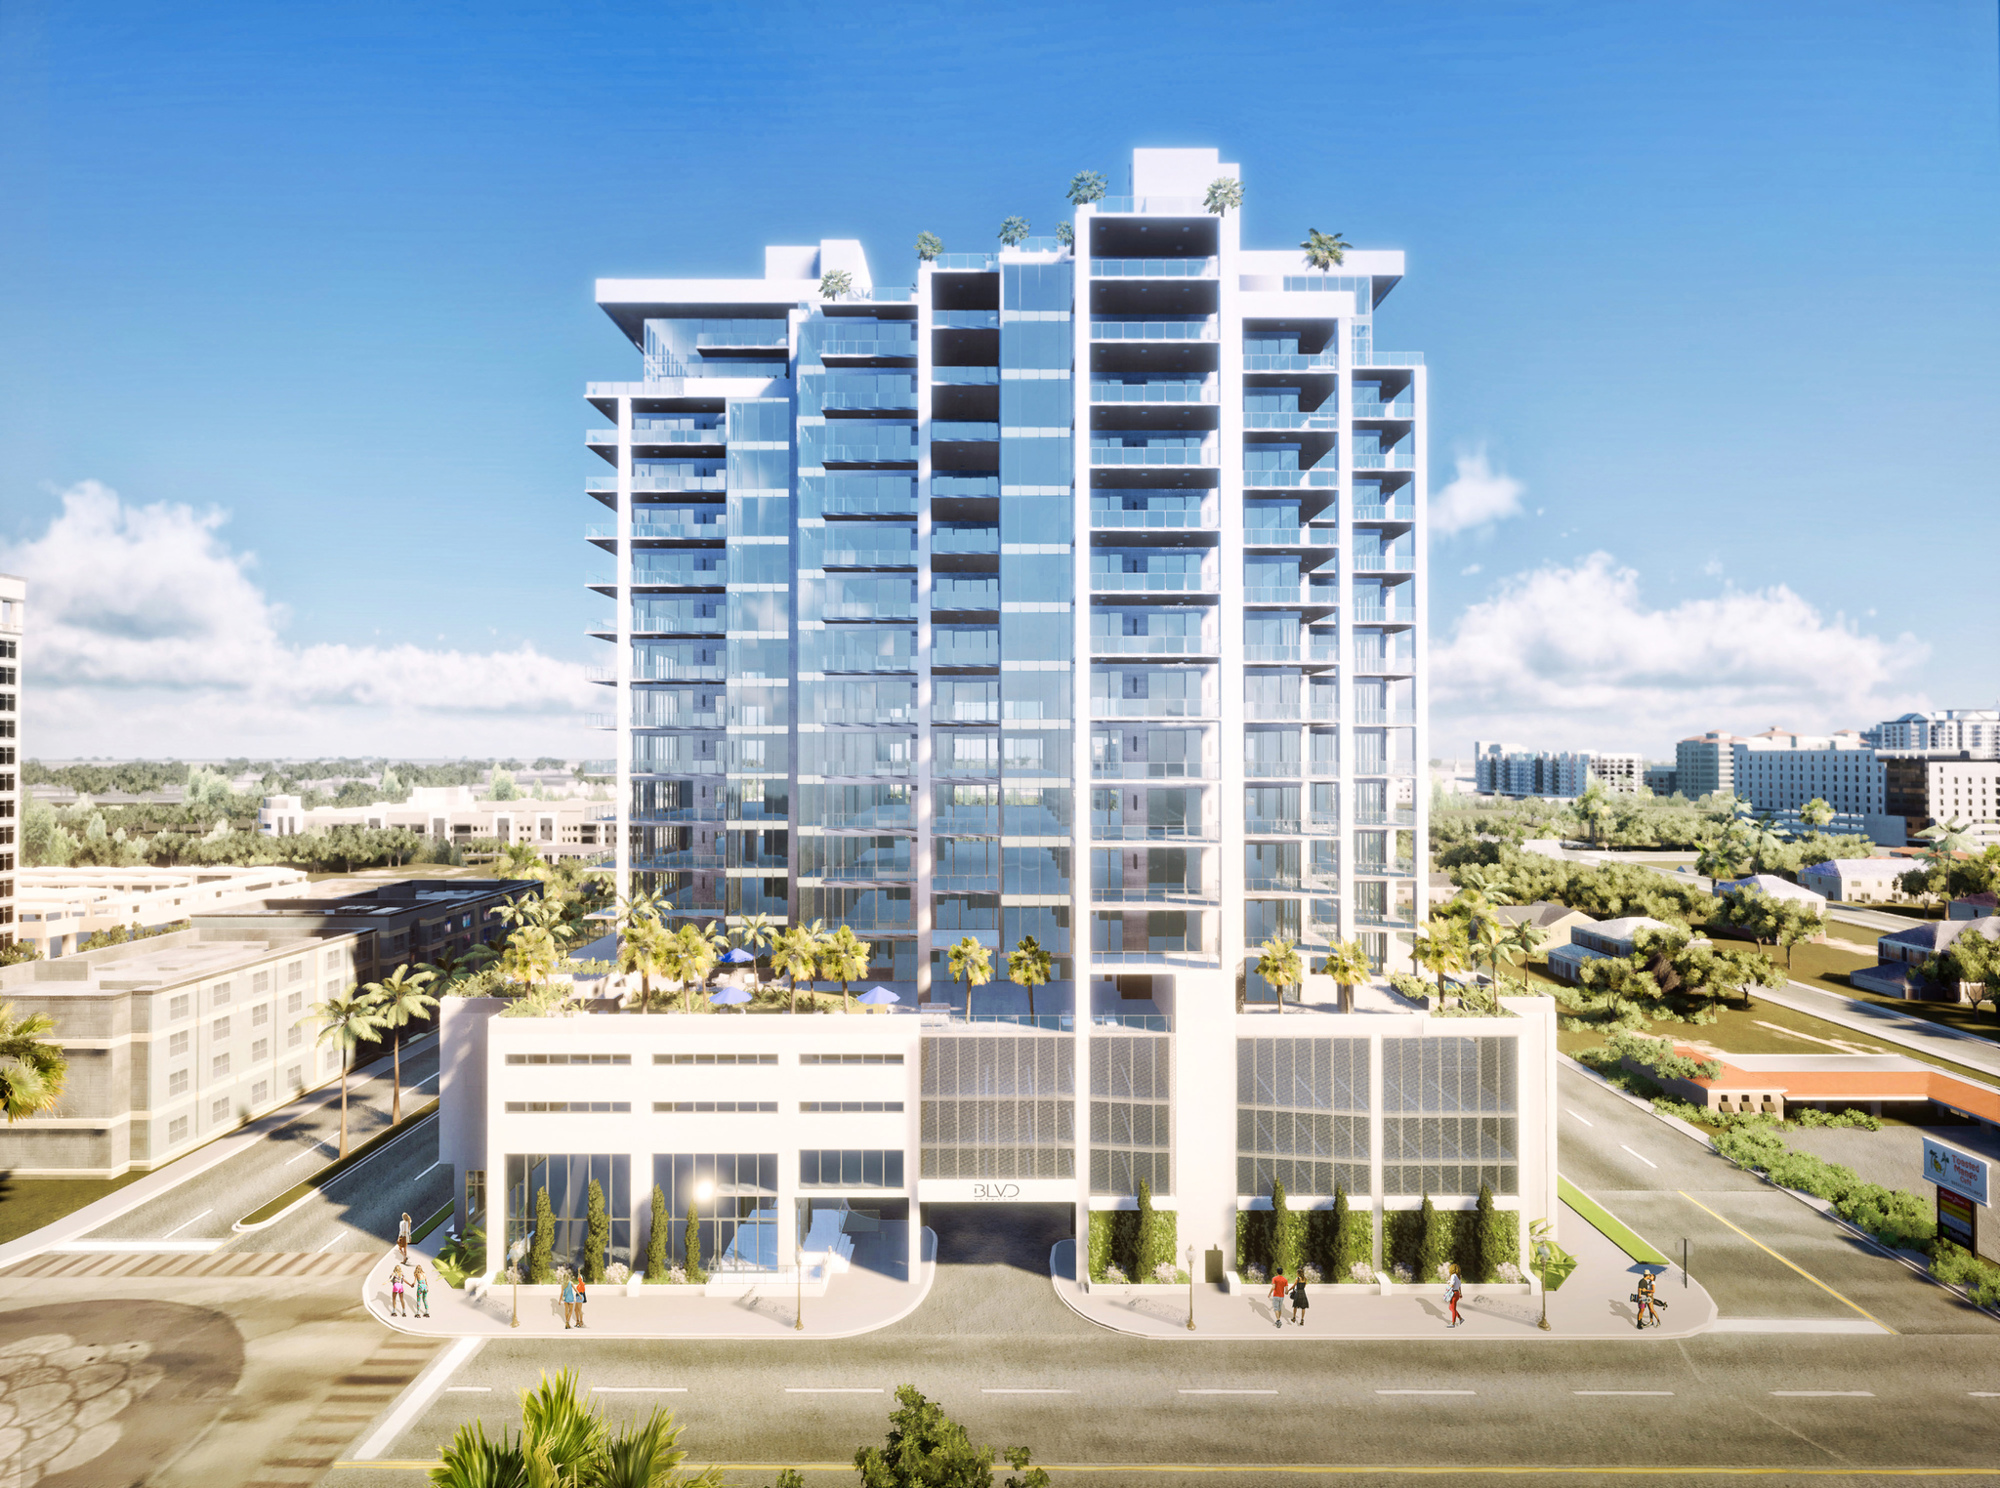 Stantec is helping Core Development Inc. on the 18-story BLVD Sarasota condo tower